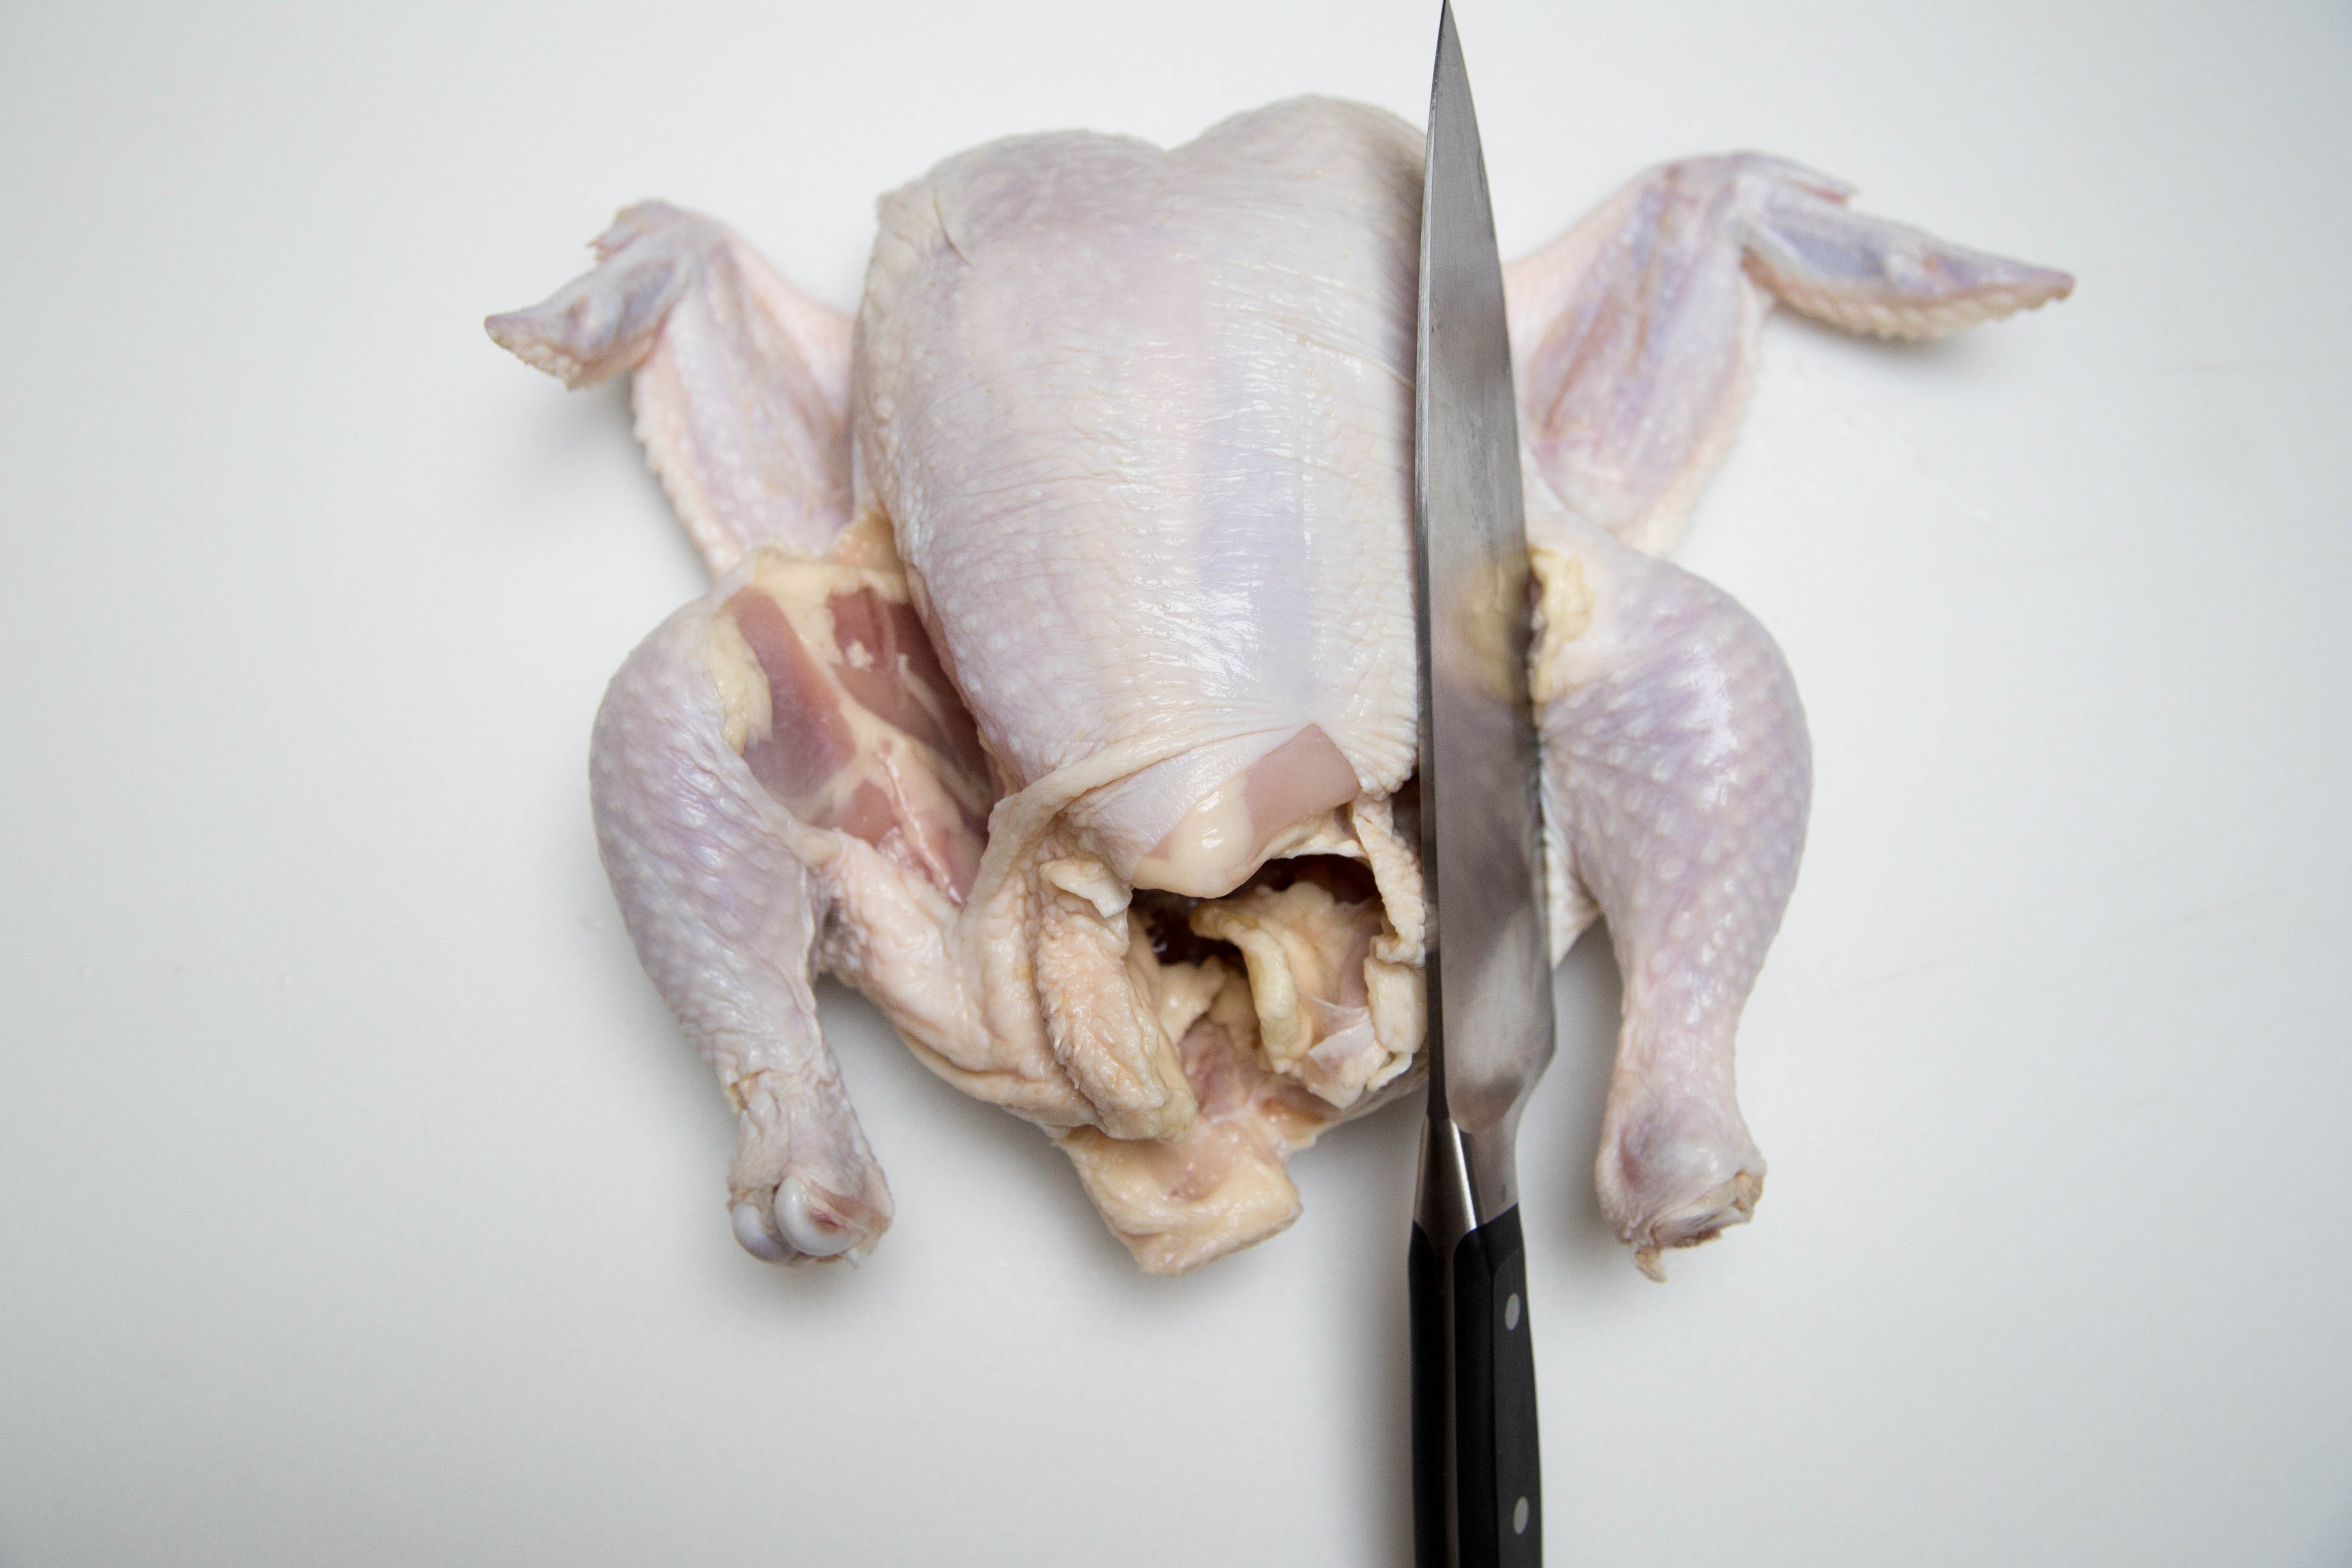 How to Cut Up a Whole Chicken - Momsdish